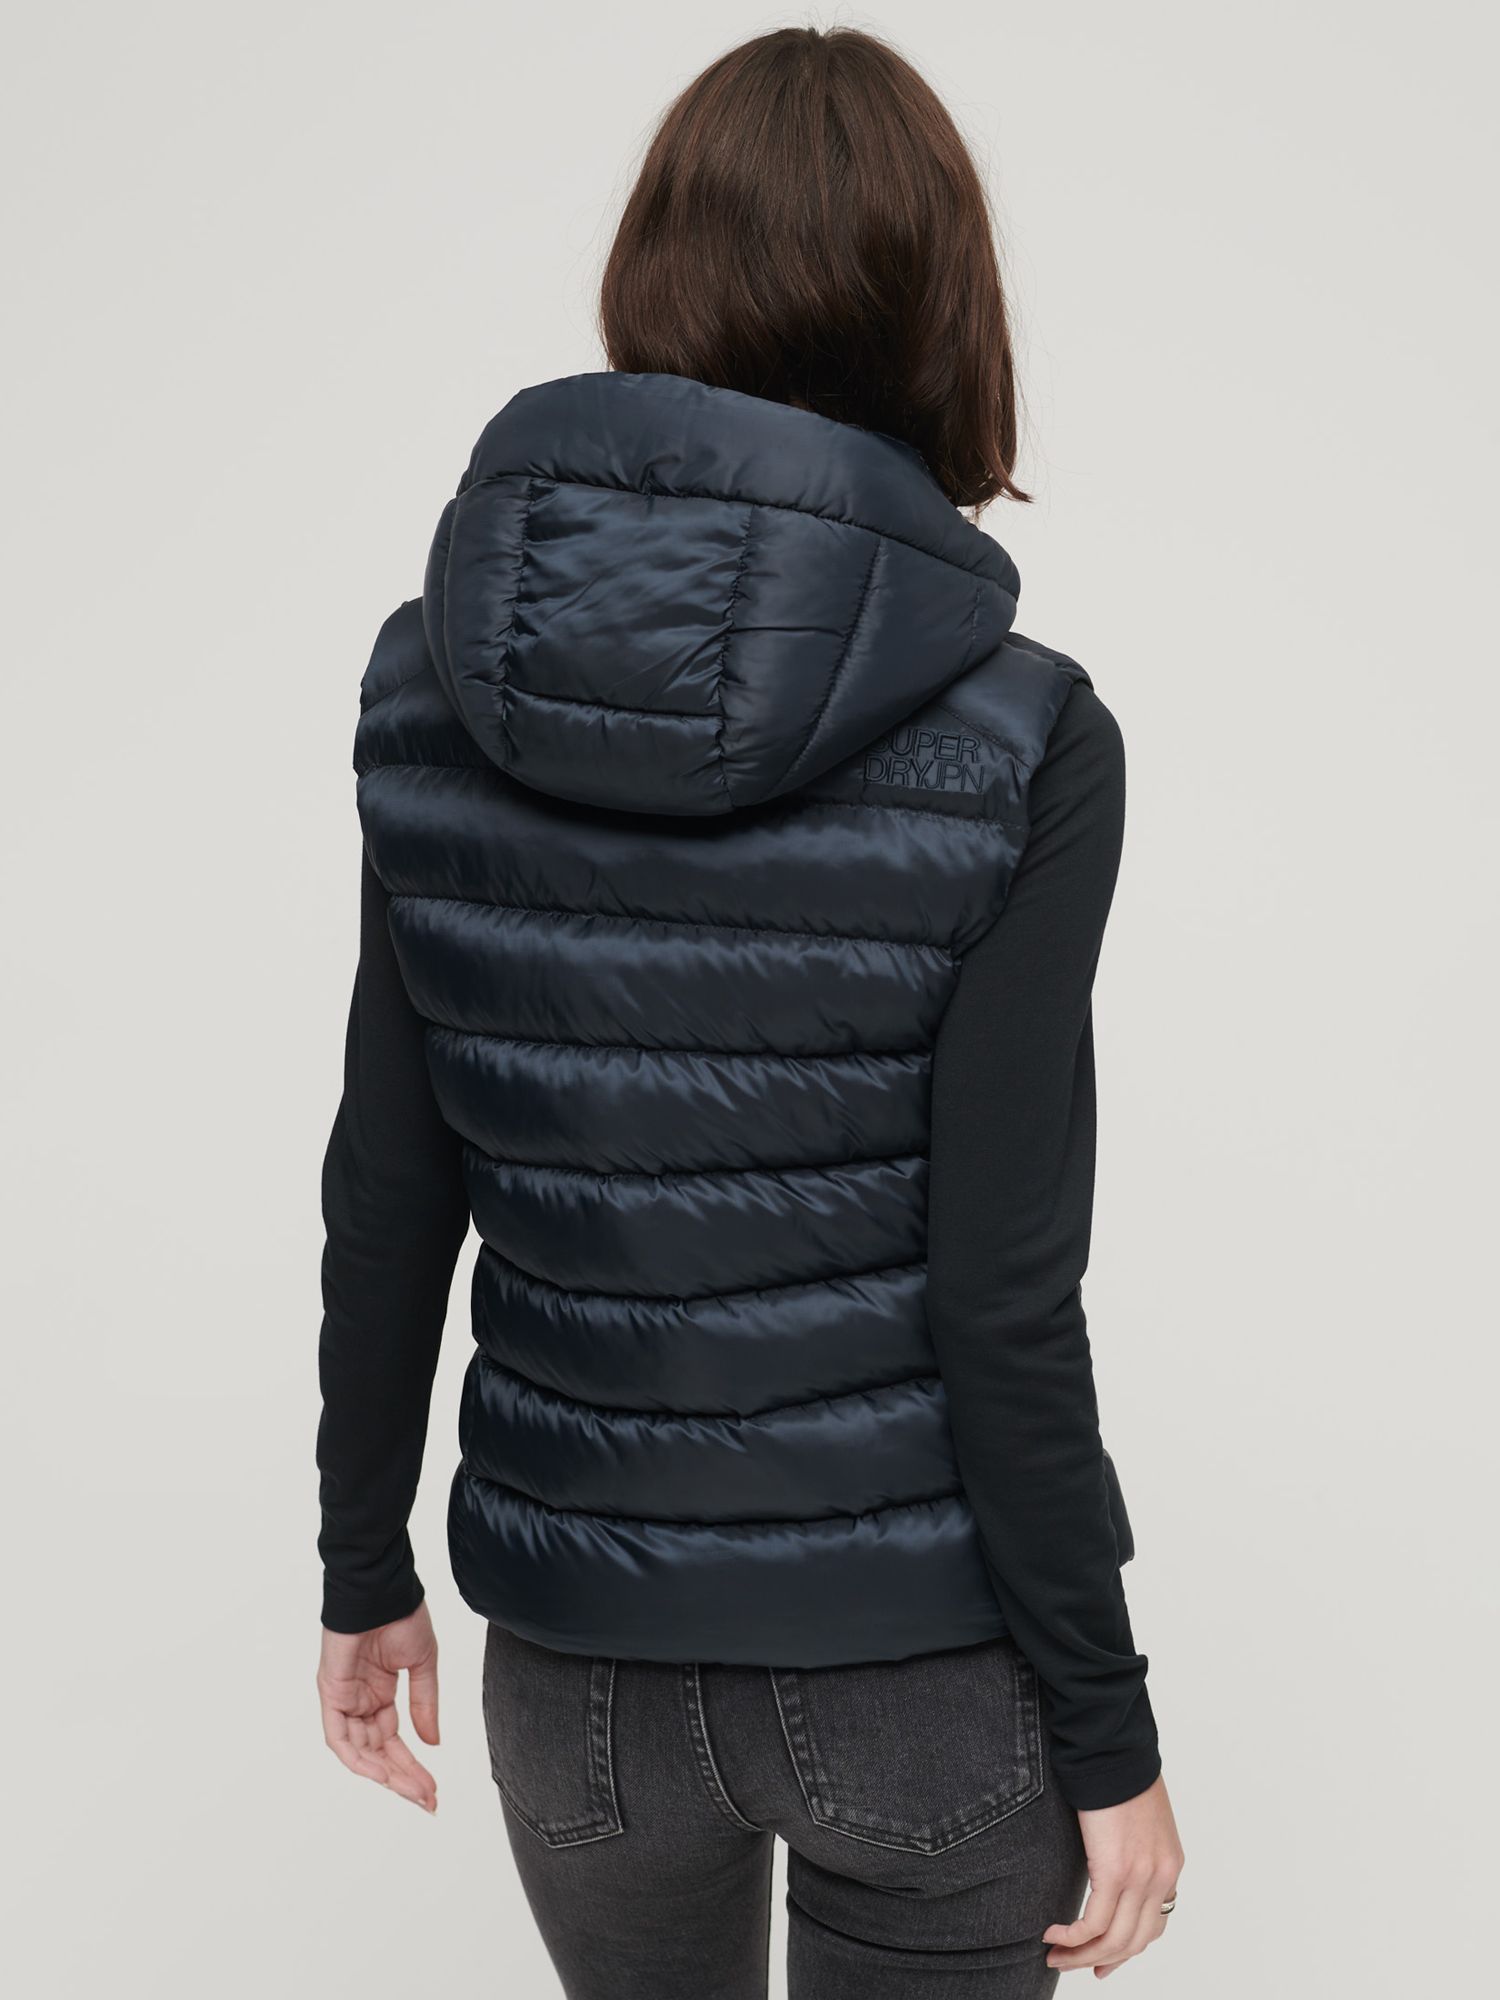 Superdry Hooded Fuji Padded Navy & Eclipse Gilet, Lewis John at Partners